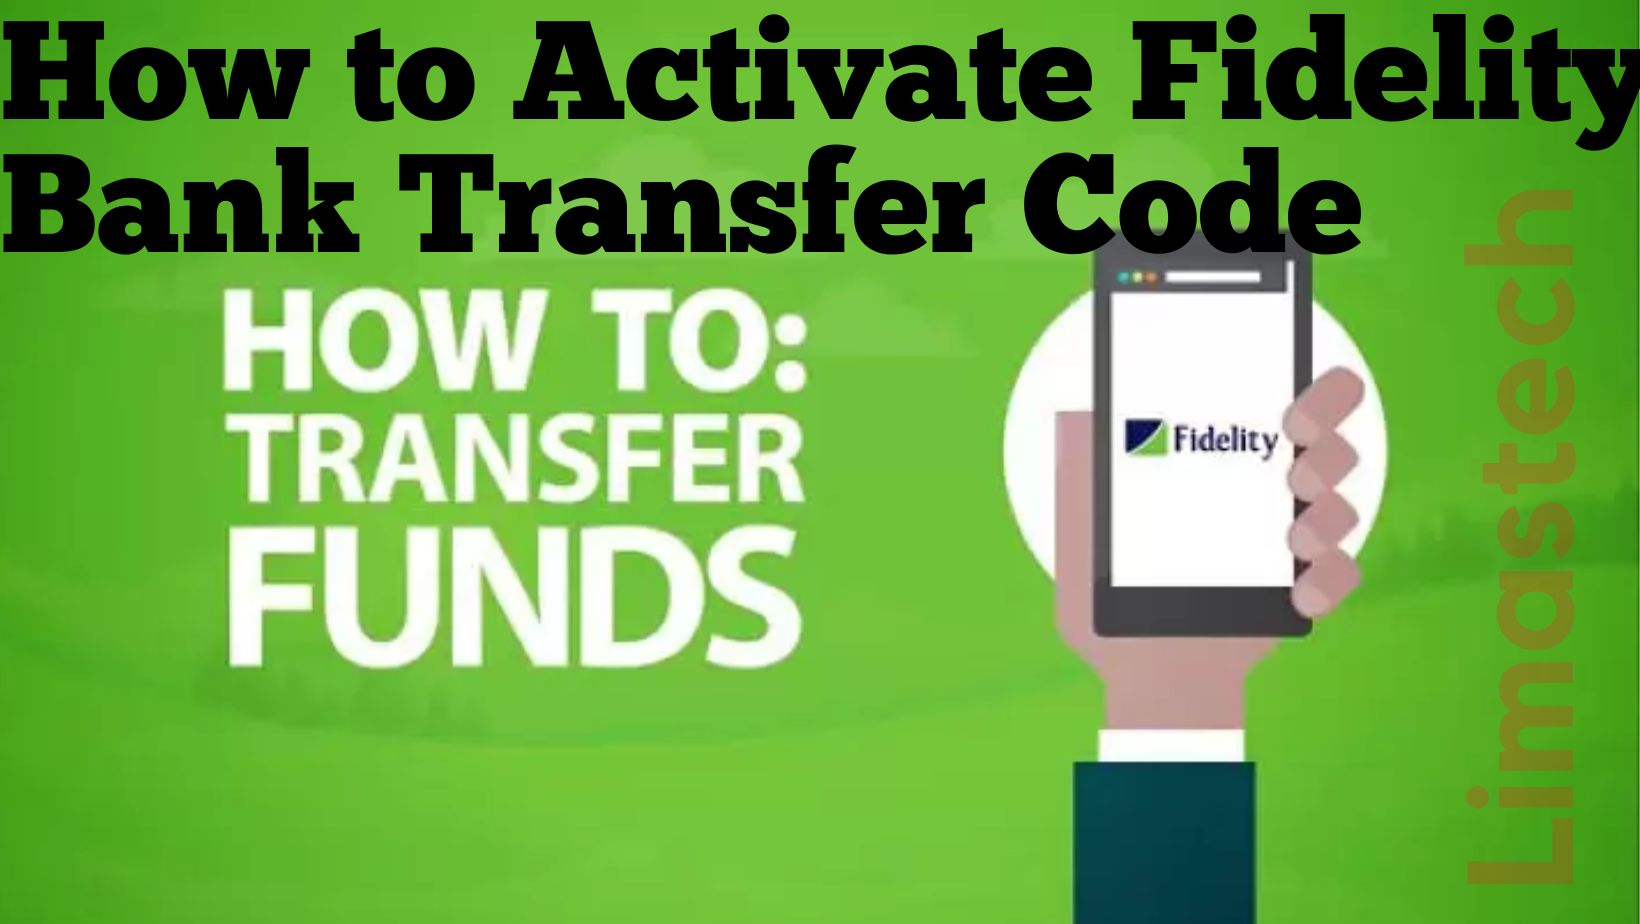 How to Activate Fidelity Bank Transfer Code